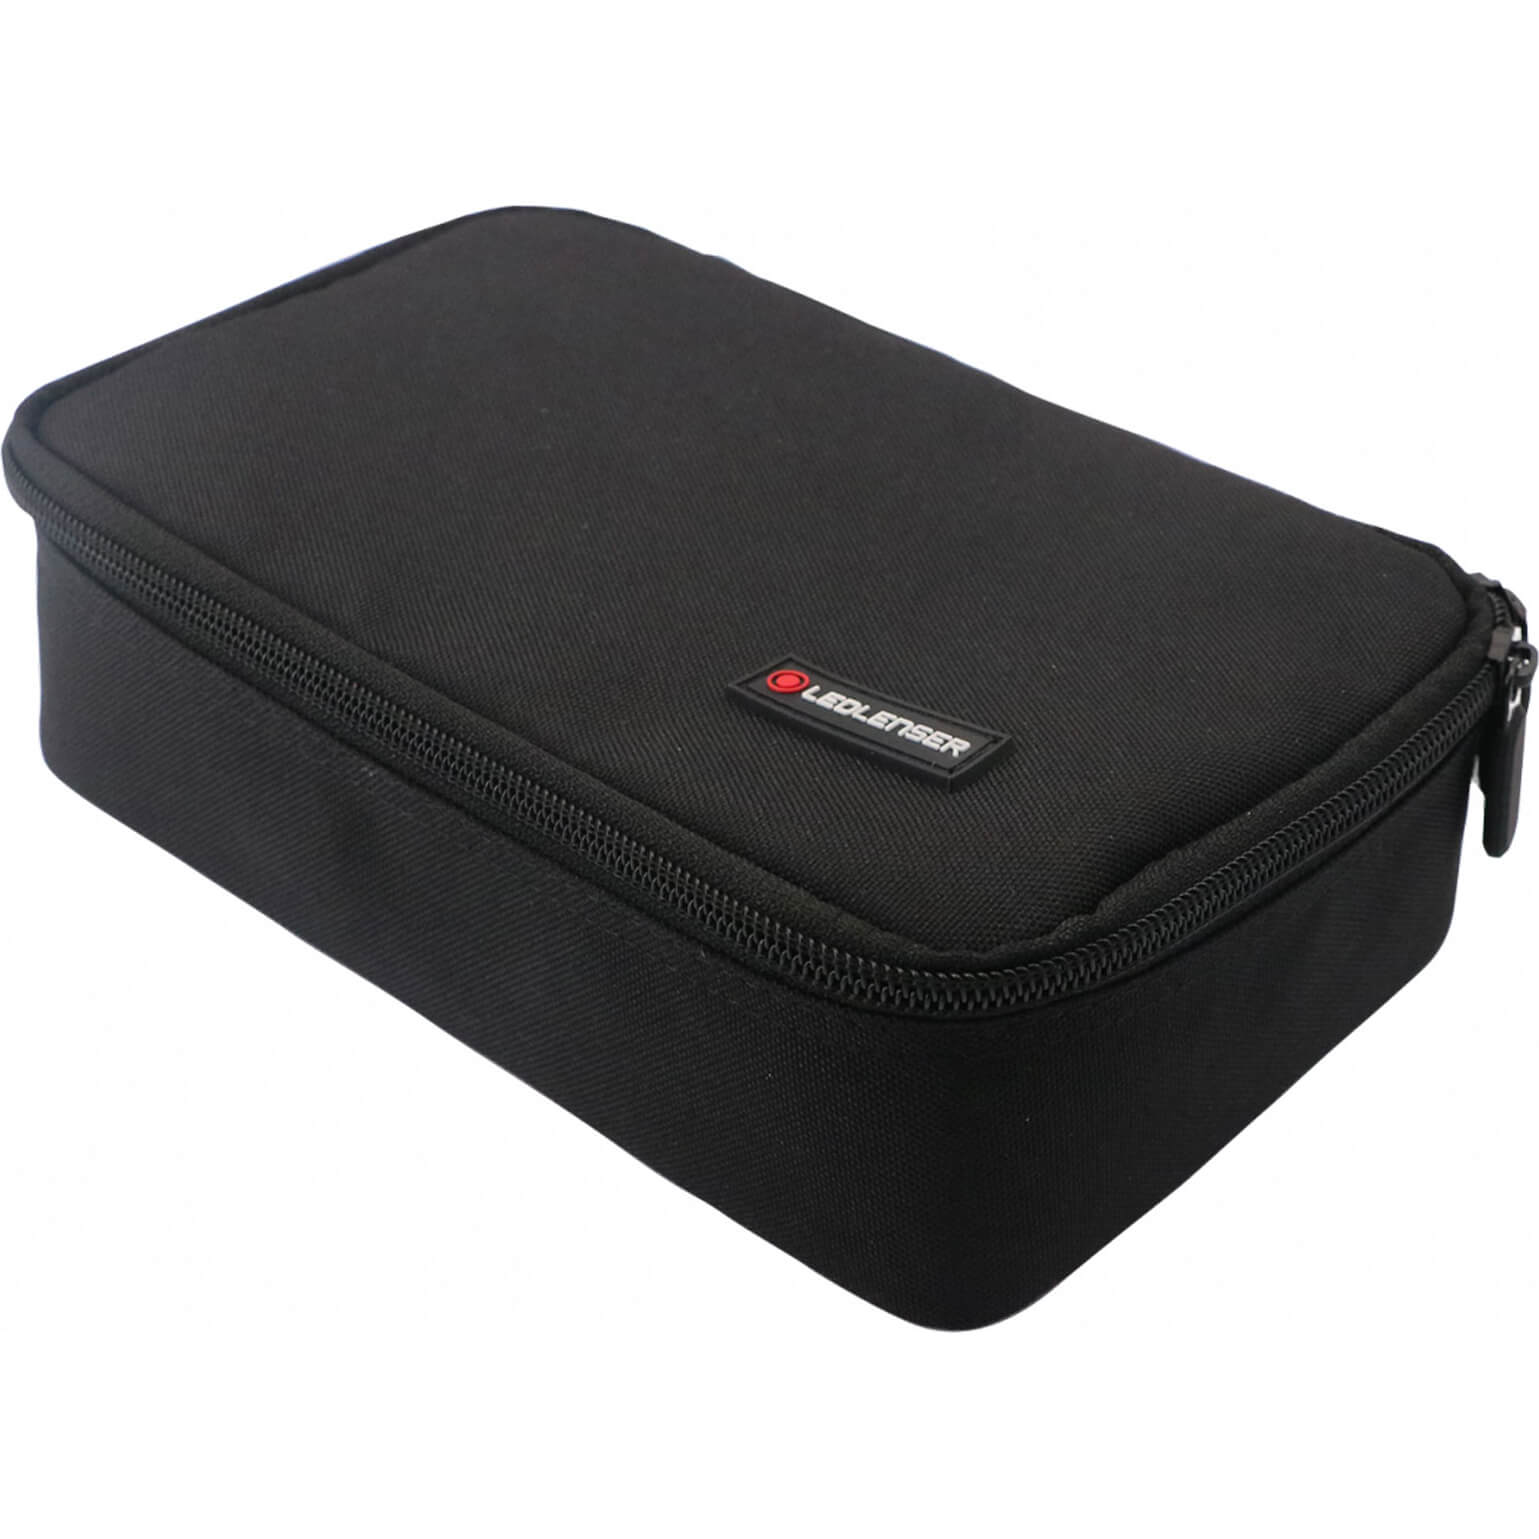 Image of LED Lenser Type A Soft Storage Pouch for Torches and Accessories